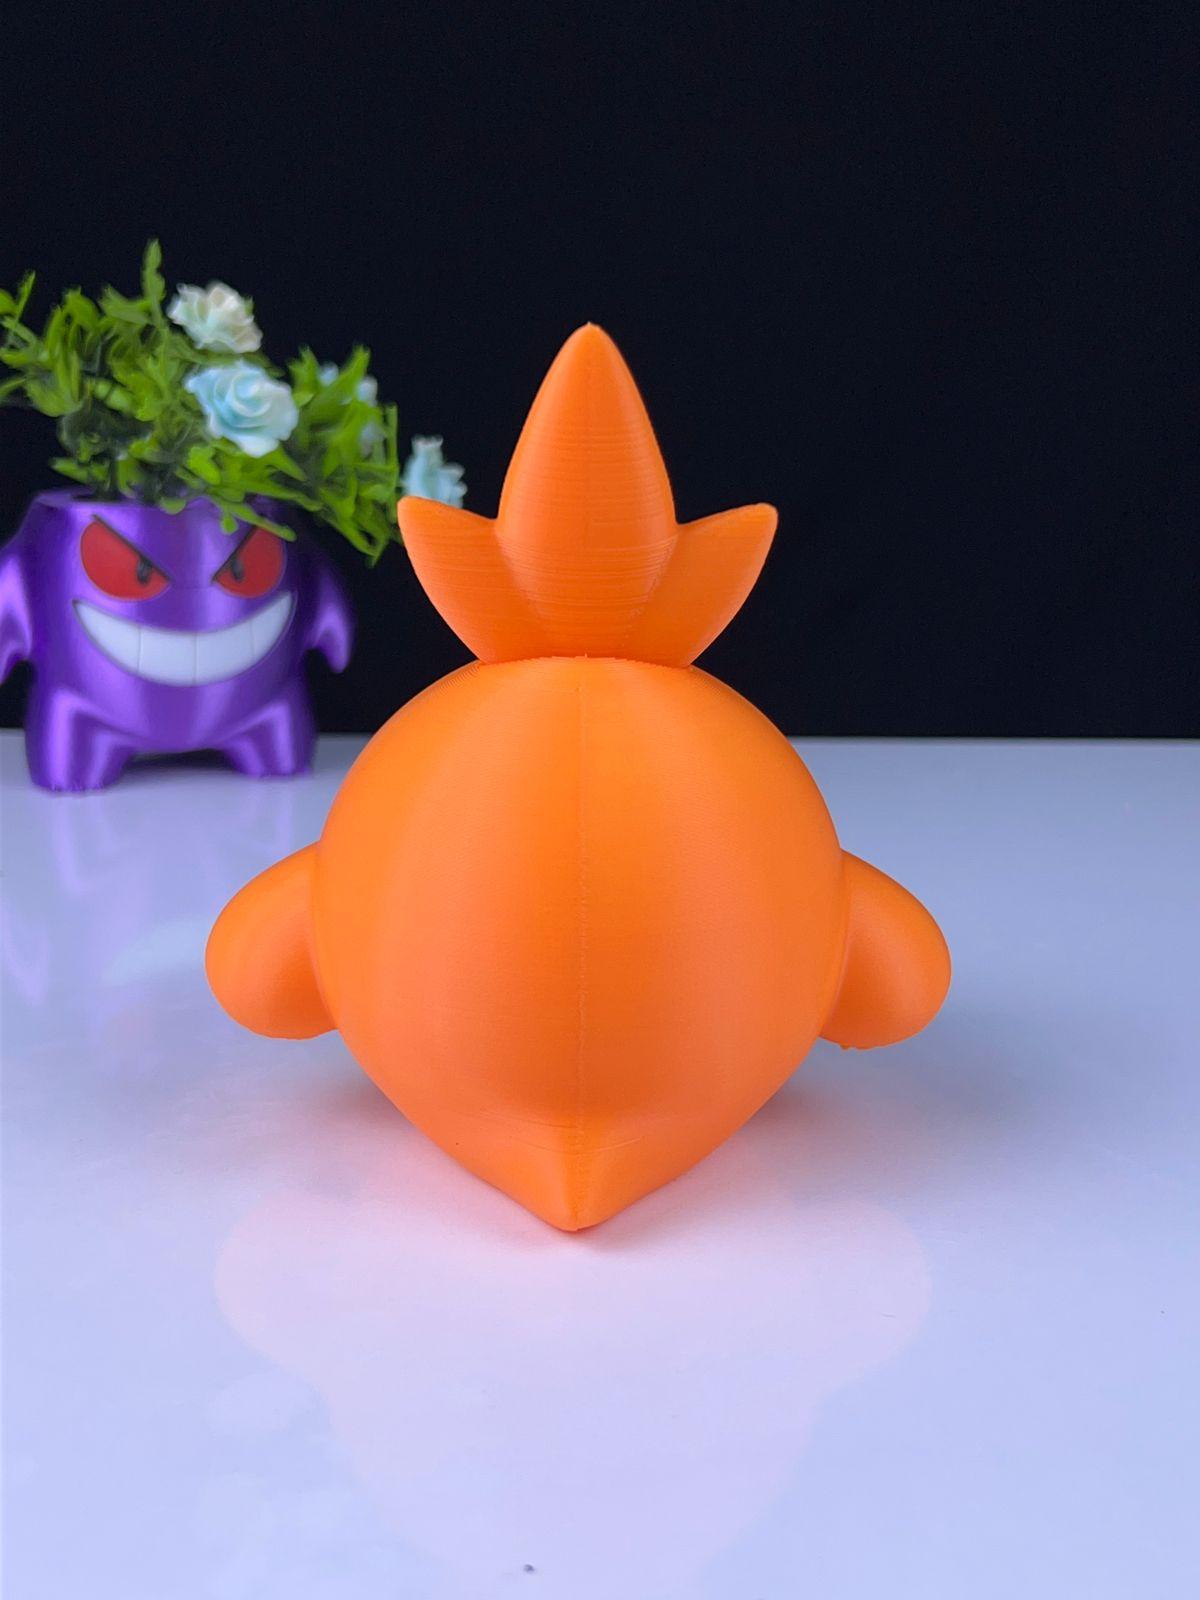 Kirby Torchic - Multipart 3d model